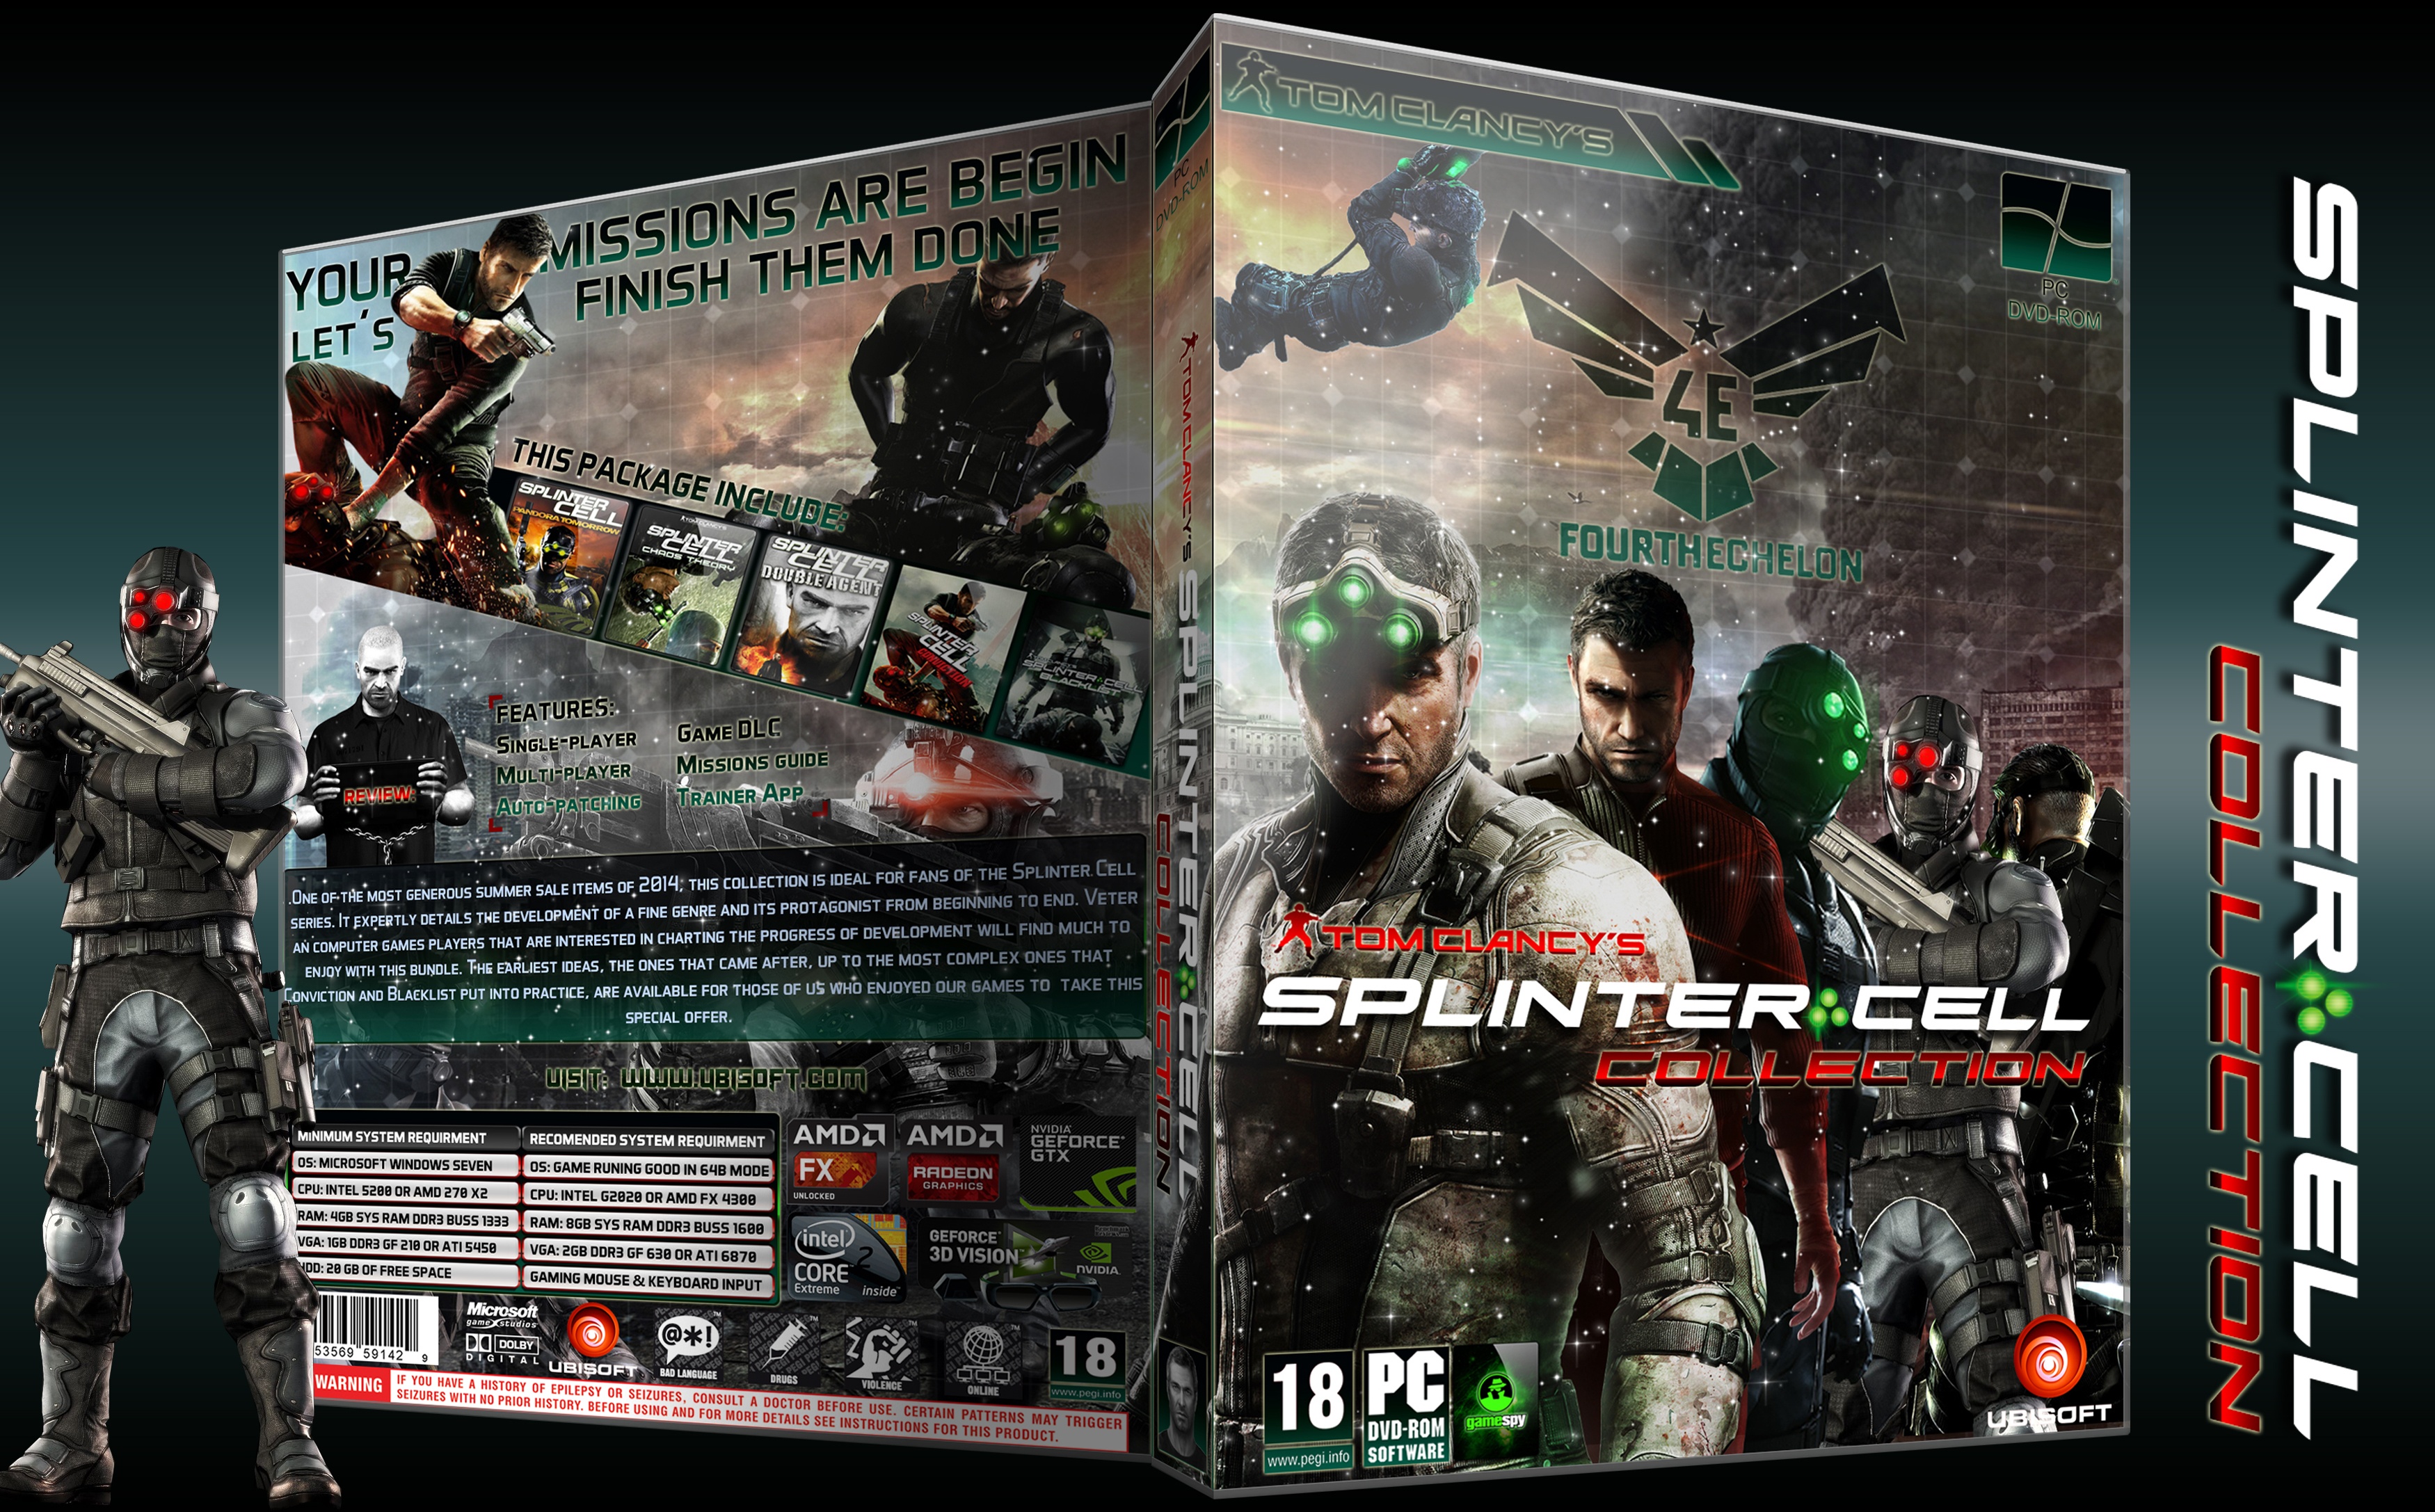 Tom Clancy's Splinter Cell: COLLECTION box cover